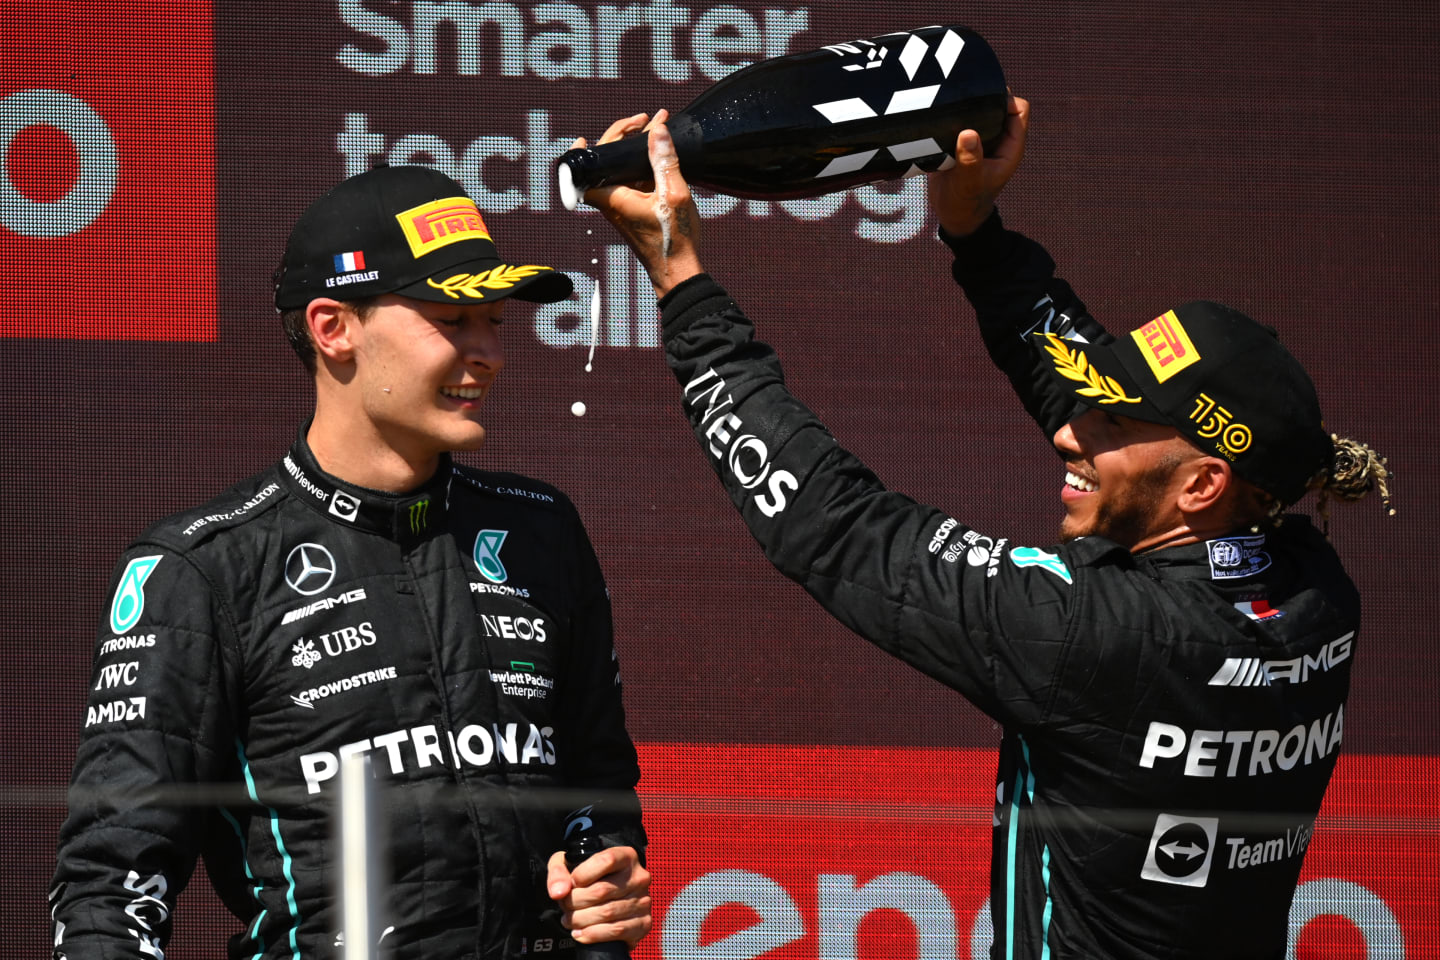 LE CASTELLET, FRANCE - JULY 24: Second placed Lewis Hamilton of Great Britain and Mercedes and